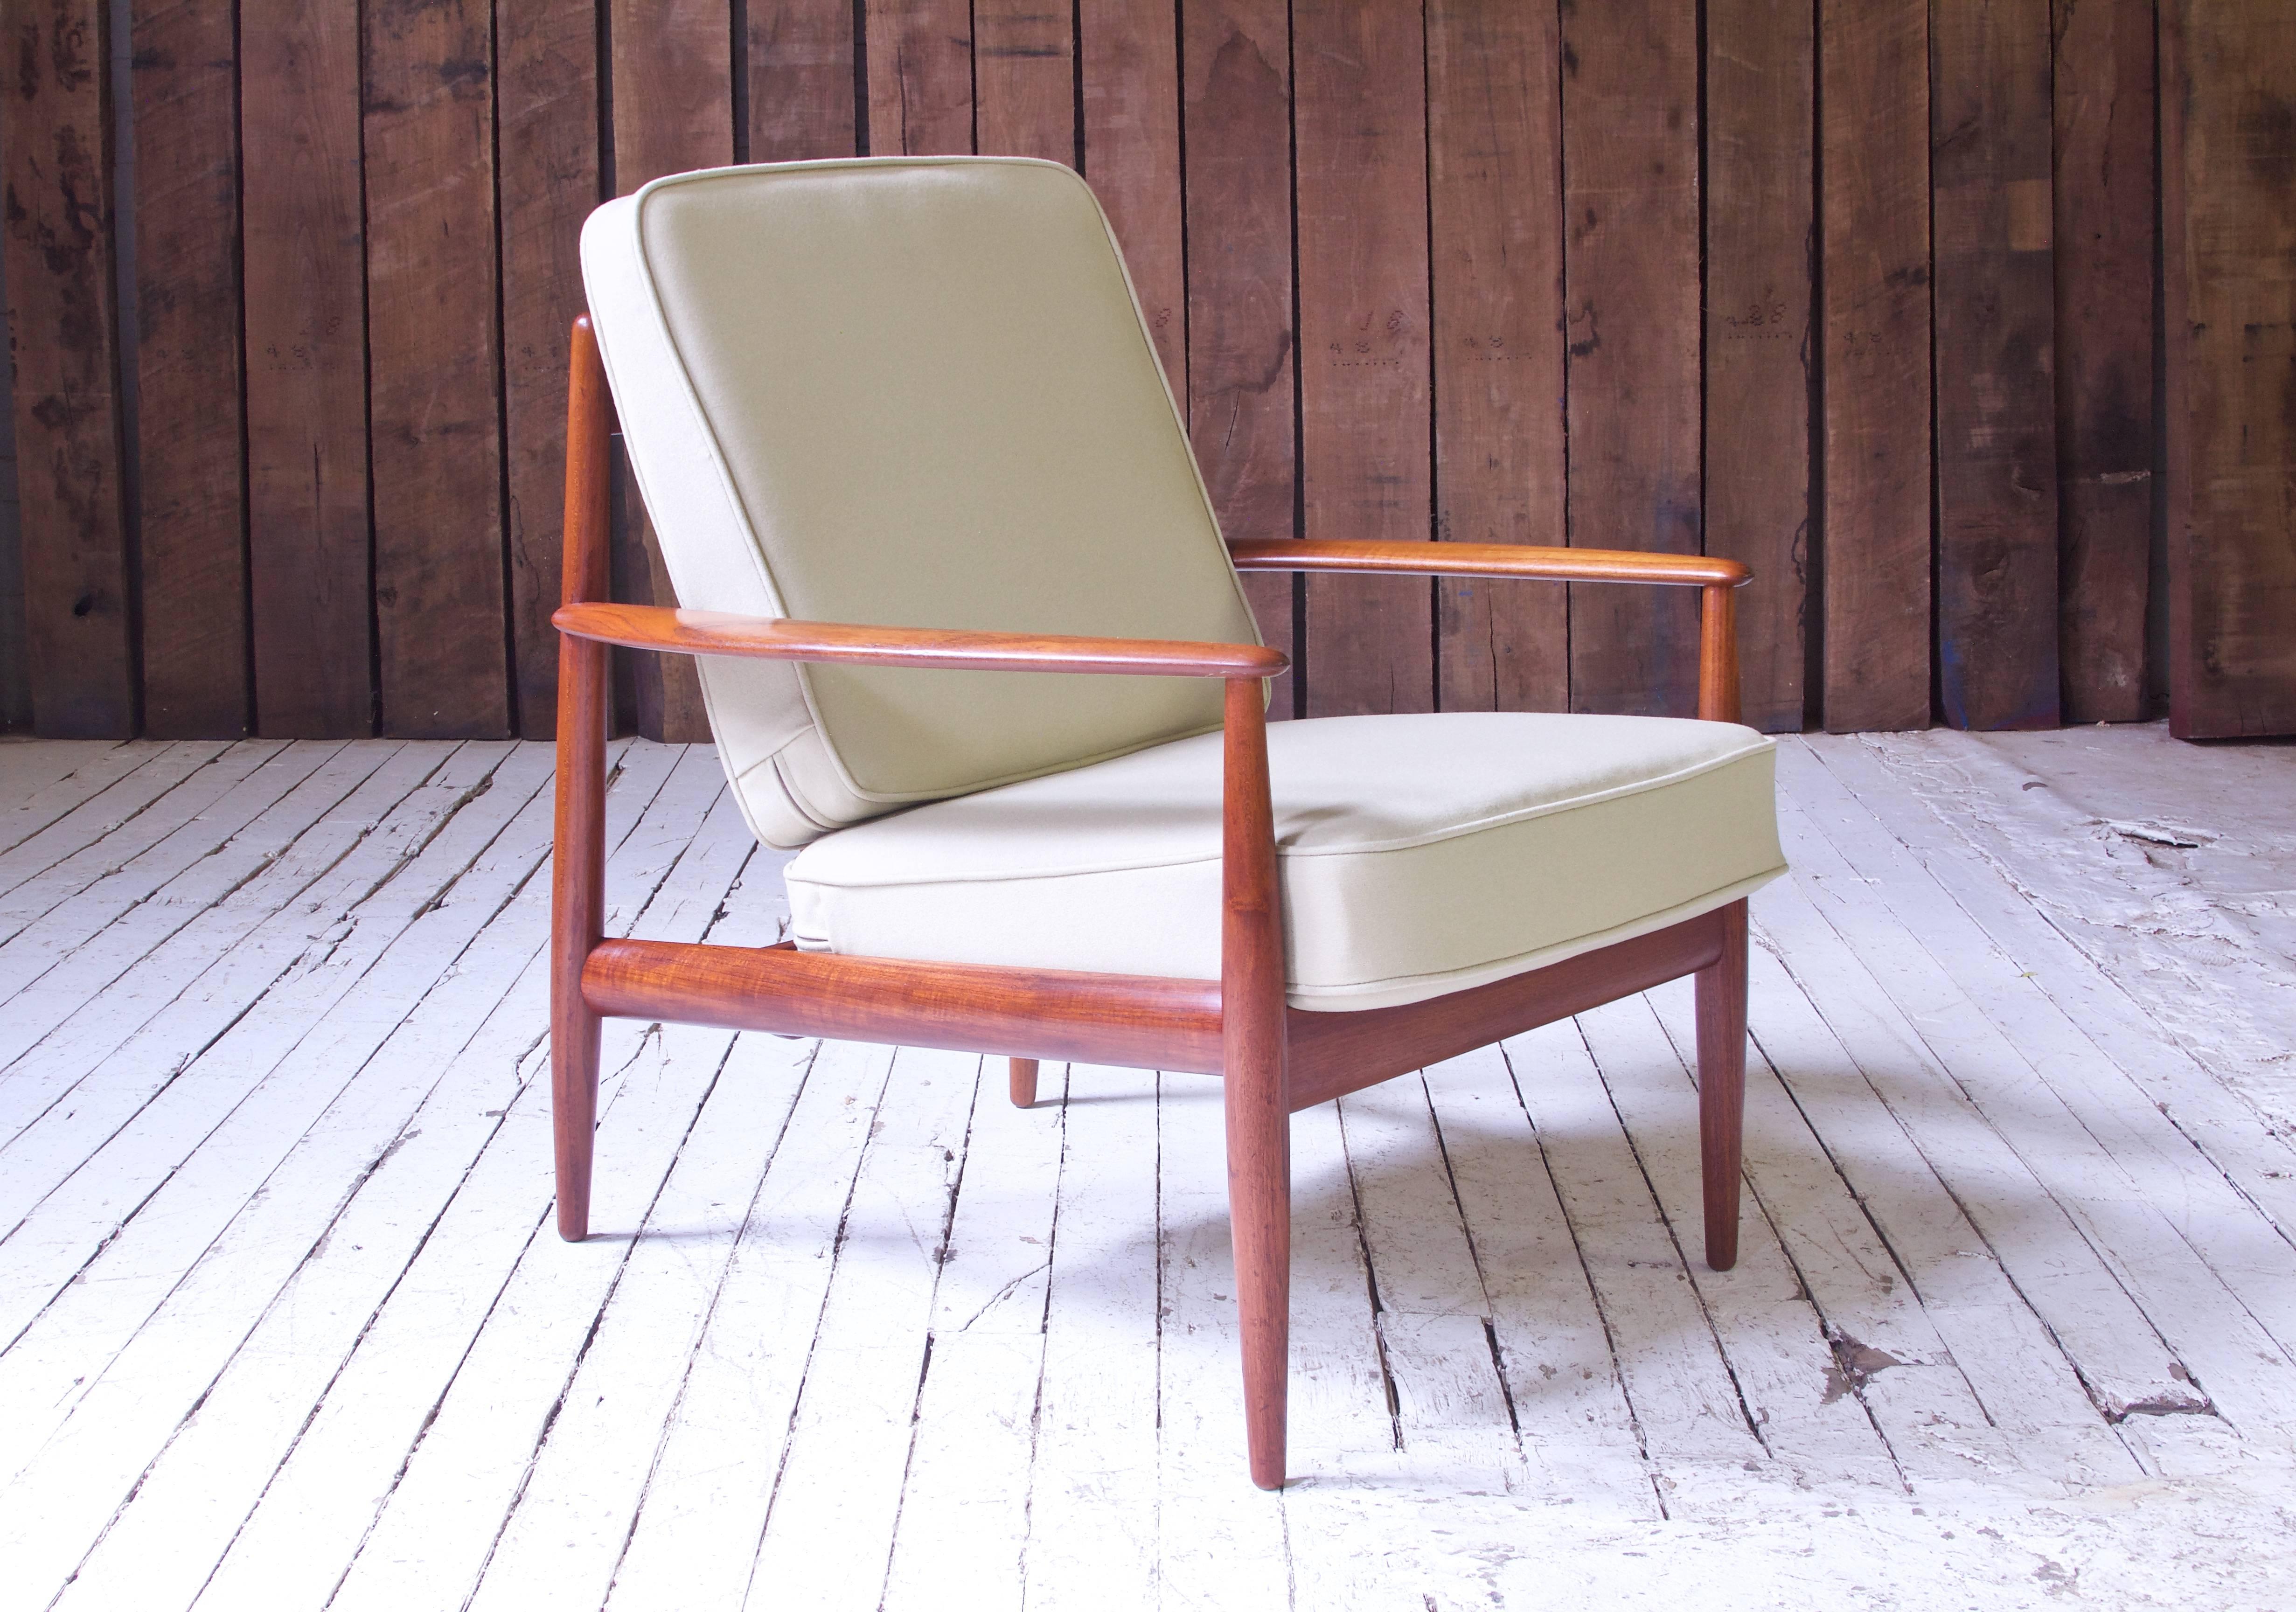 A lovely example of Grete Jalk's compact FD-118 easy chair in Teak and beige wool, manufactured by France and Son, c1960. The stock-selection on this particular frame is outstanding, featuring gorgeously figured fiddleback sections and dense, old